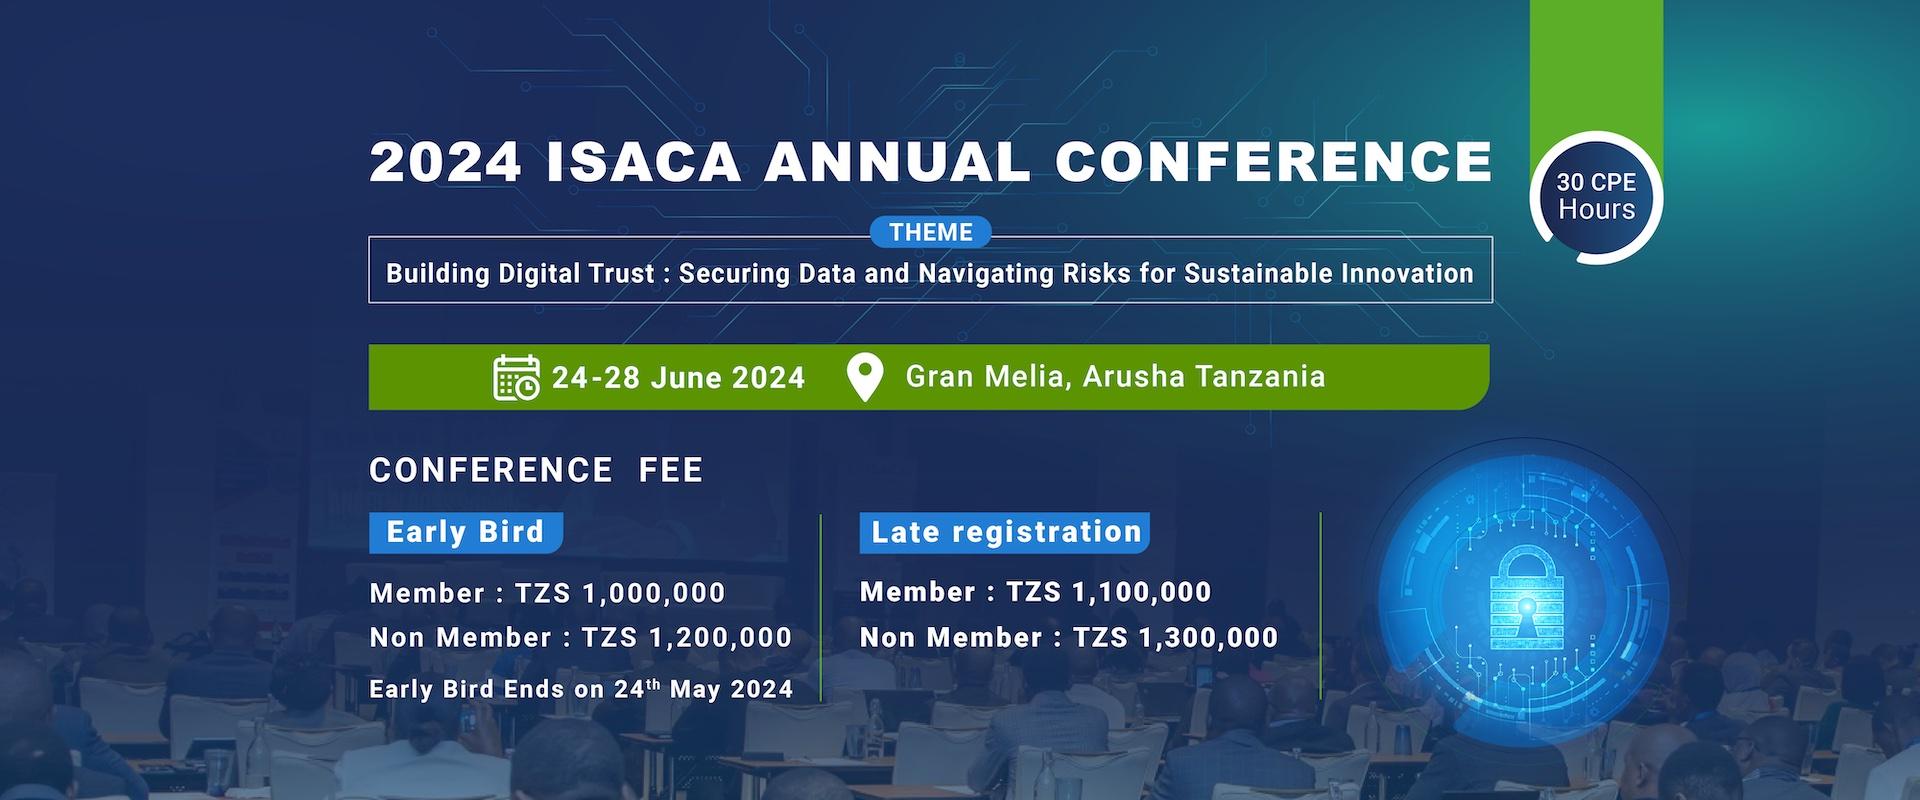 ISACA Annual Conference